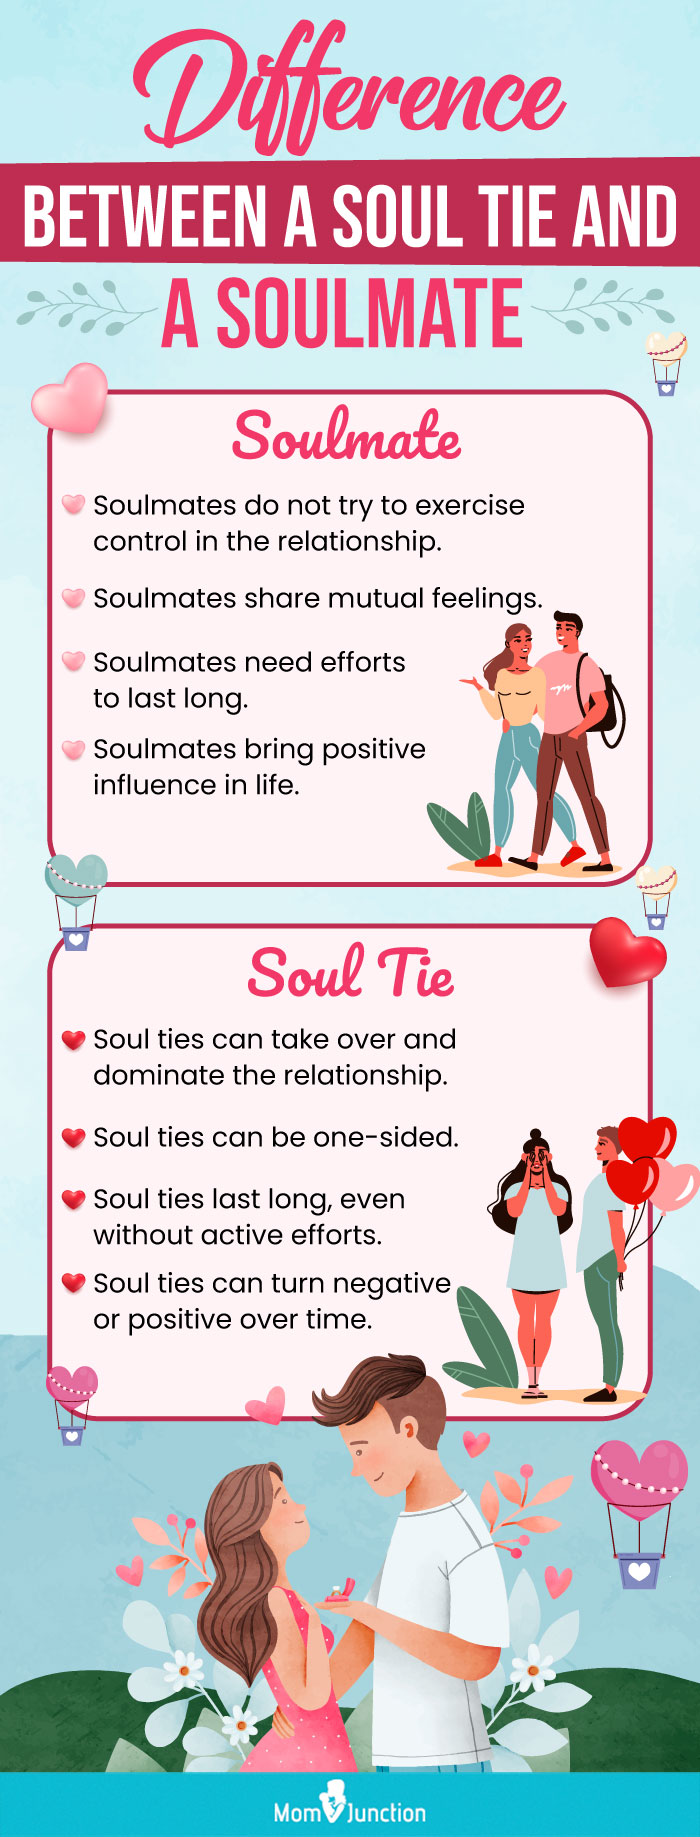 Soul Ties: Meaning, Signs, and How to Break One